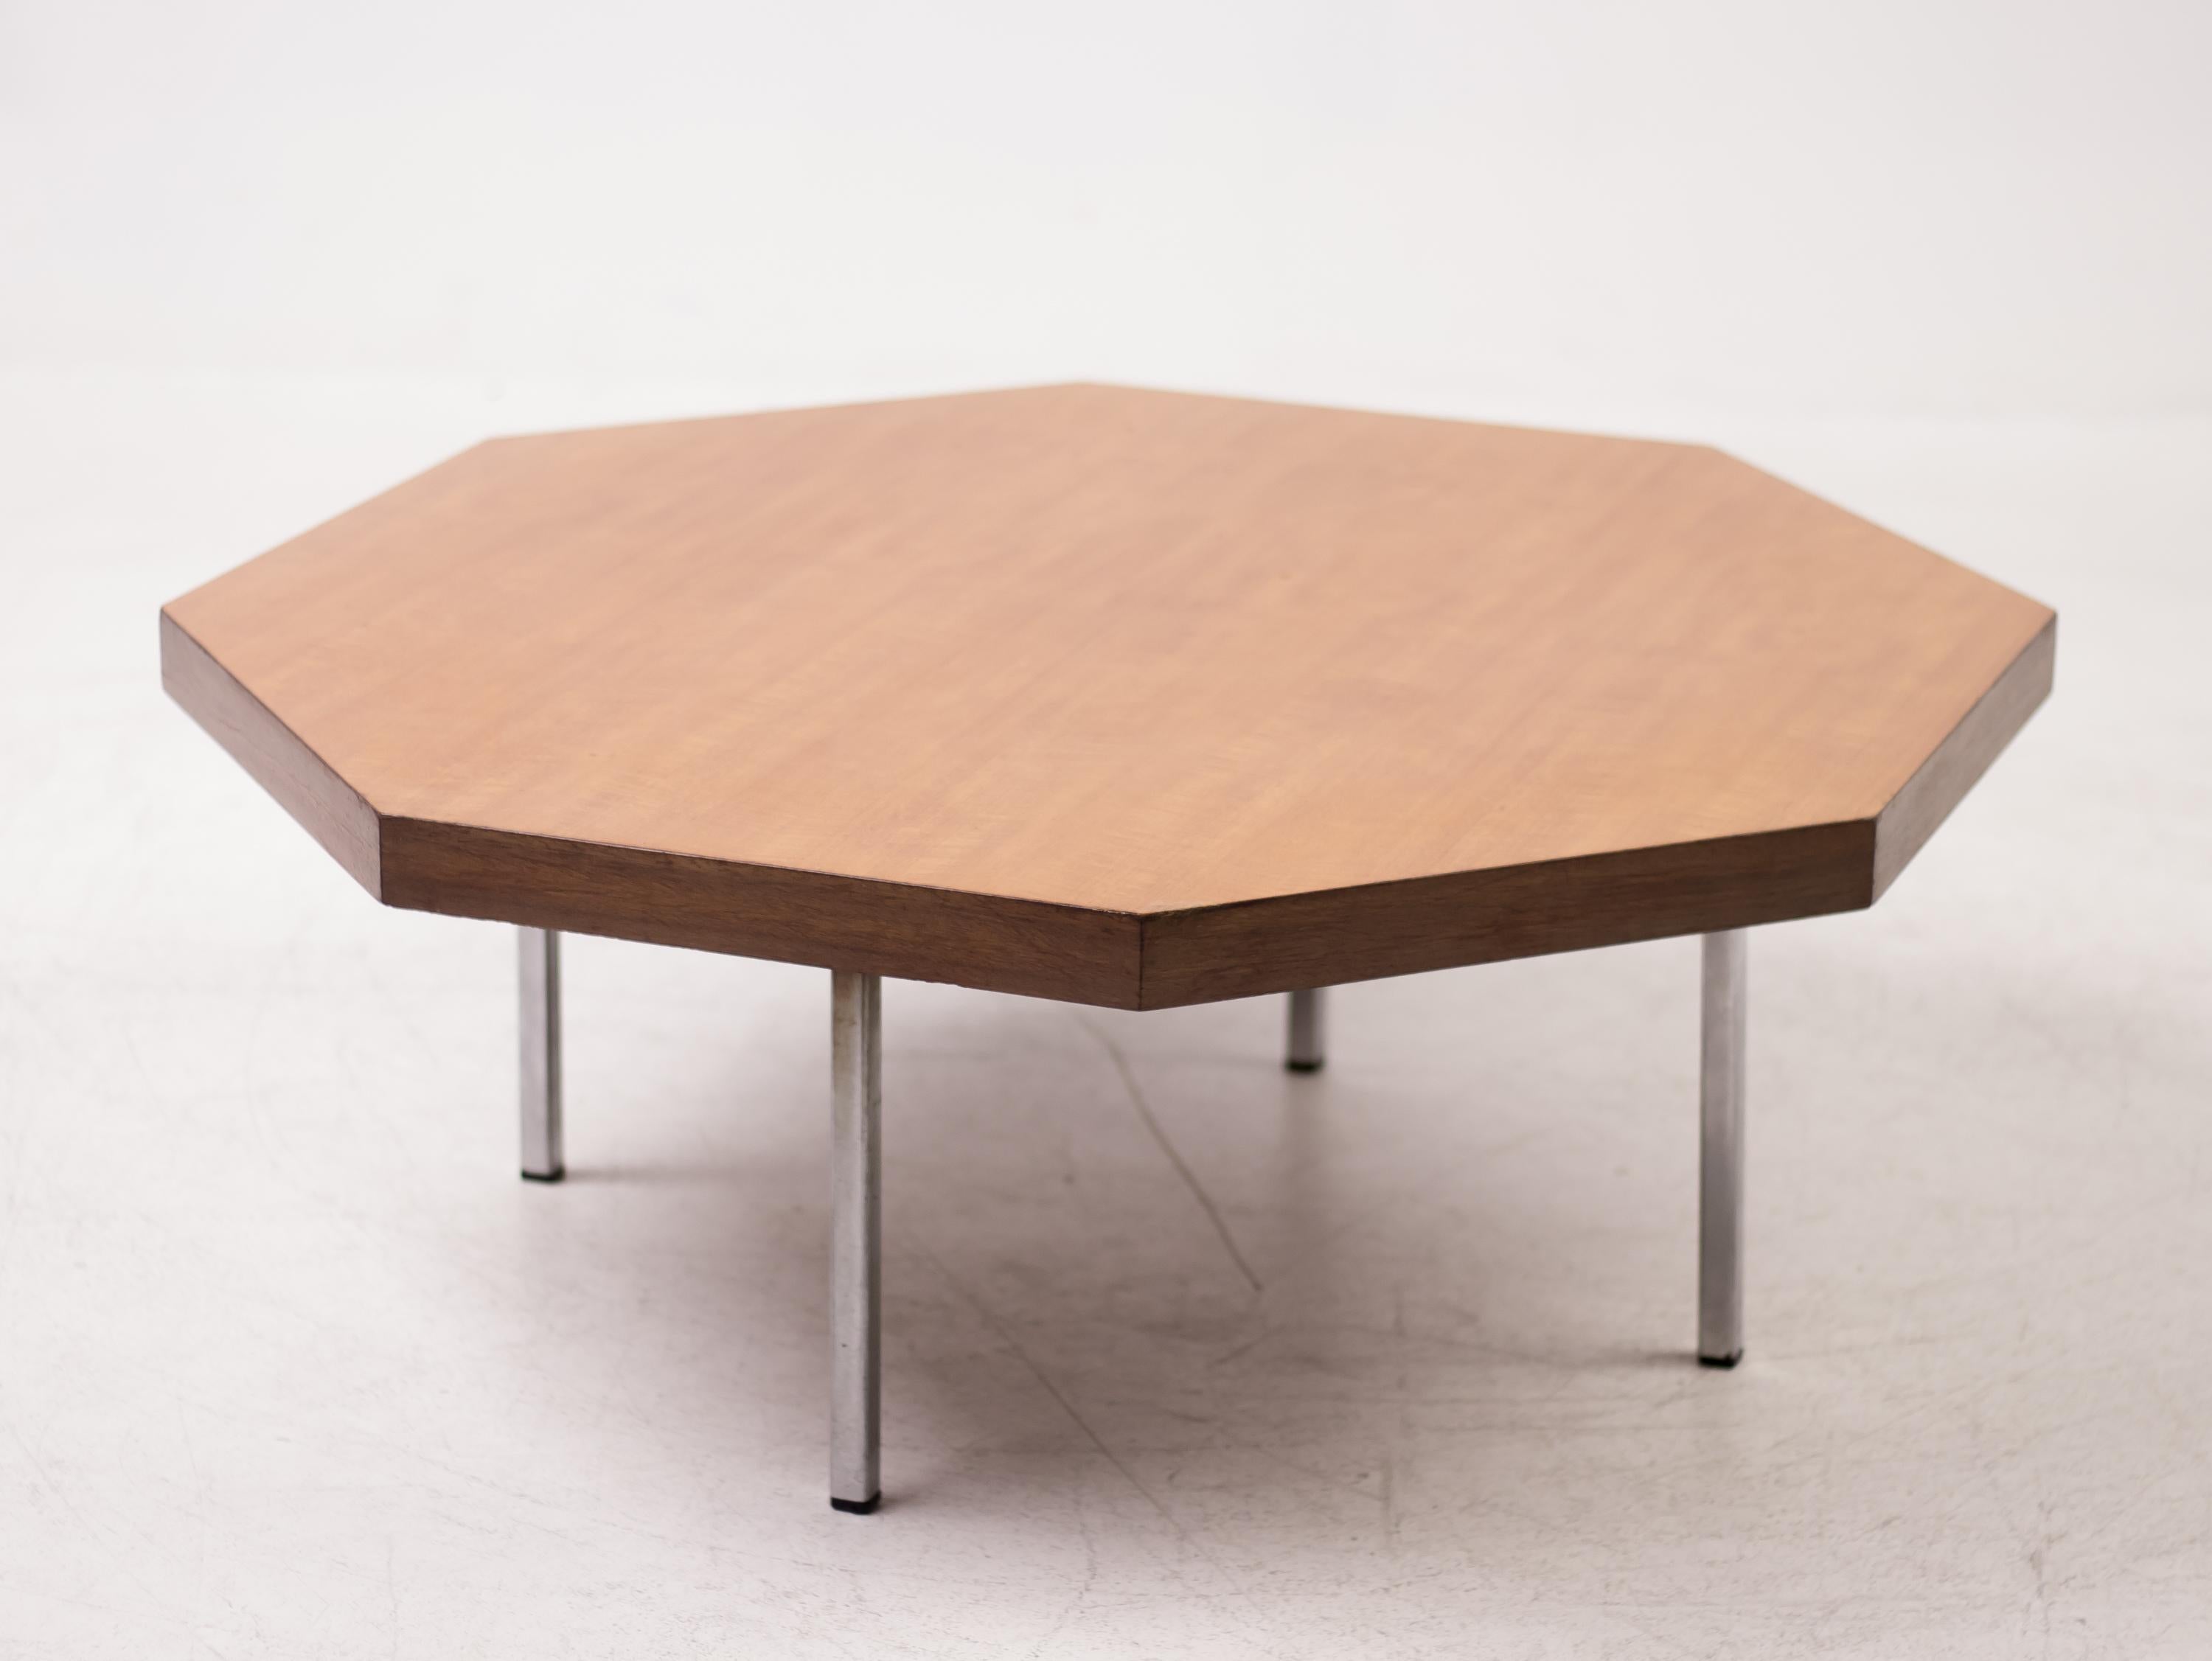 Octagonal coffee table by French designer Pierre Paulin.
This is a very rare table from the 800 series made in the late 1960s.
Marked with silver Artifort label.